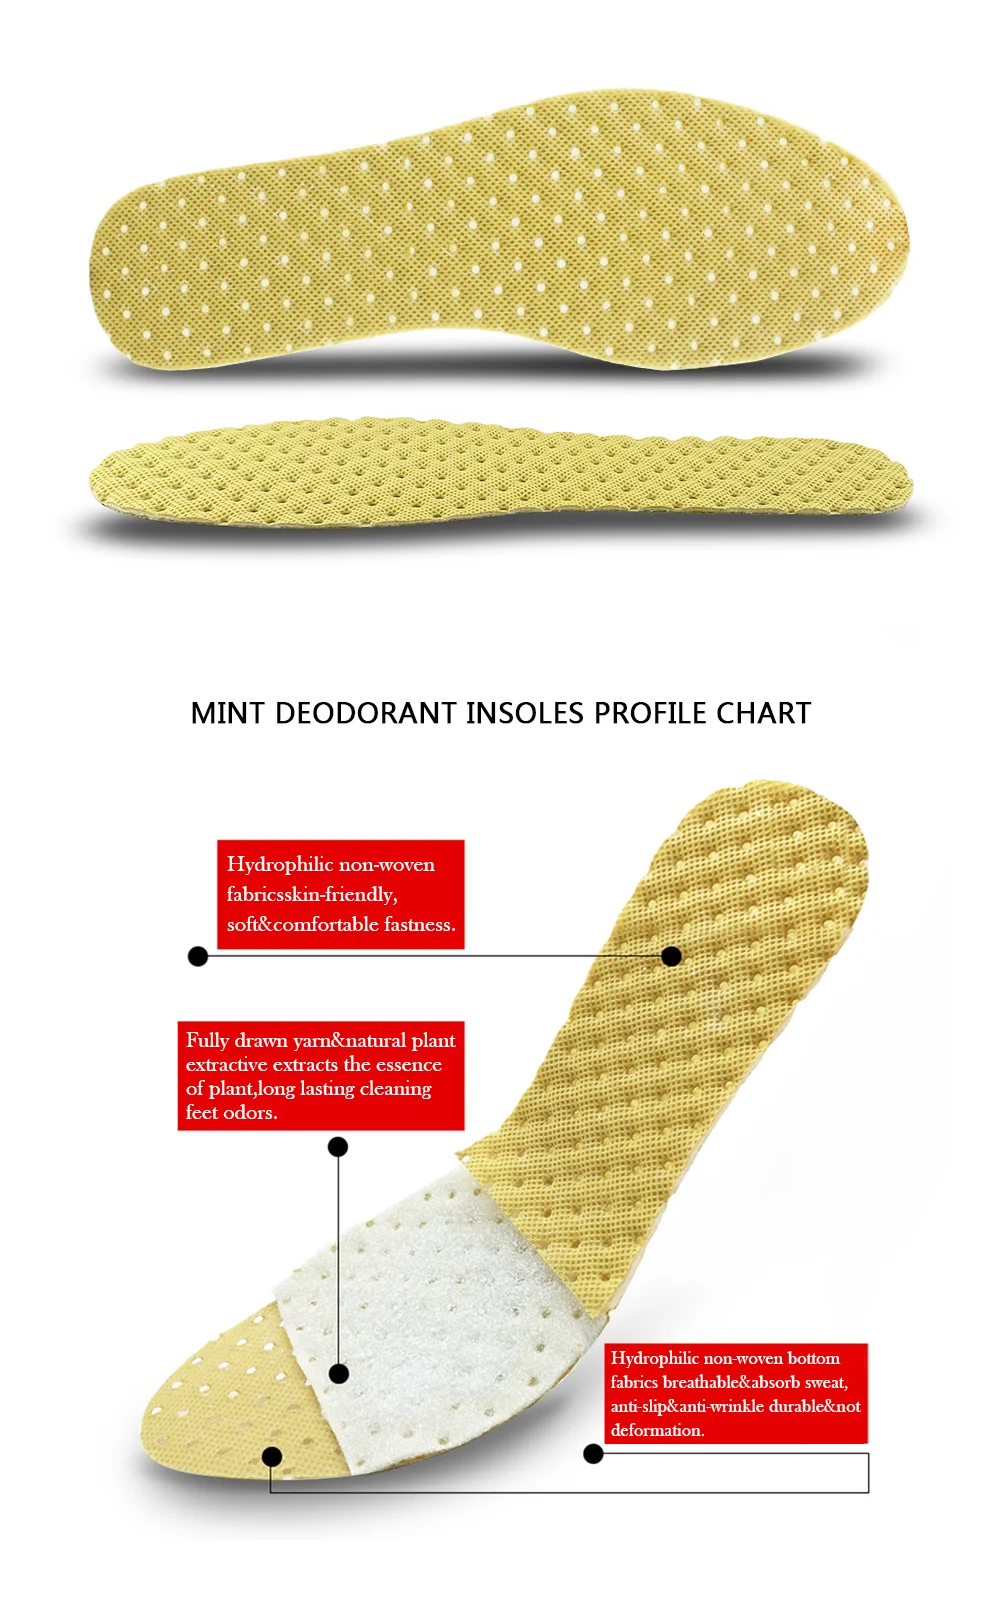 PCSsole deodorant insoles light weight mint herbal shoes pad absorb sweat breathable shoes pad cushion A1004 11